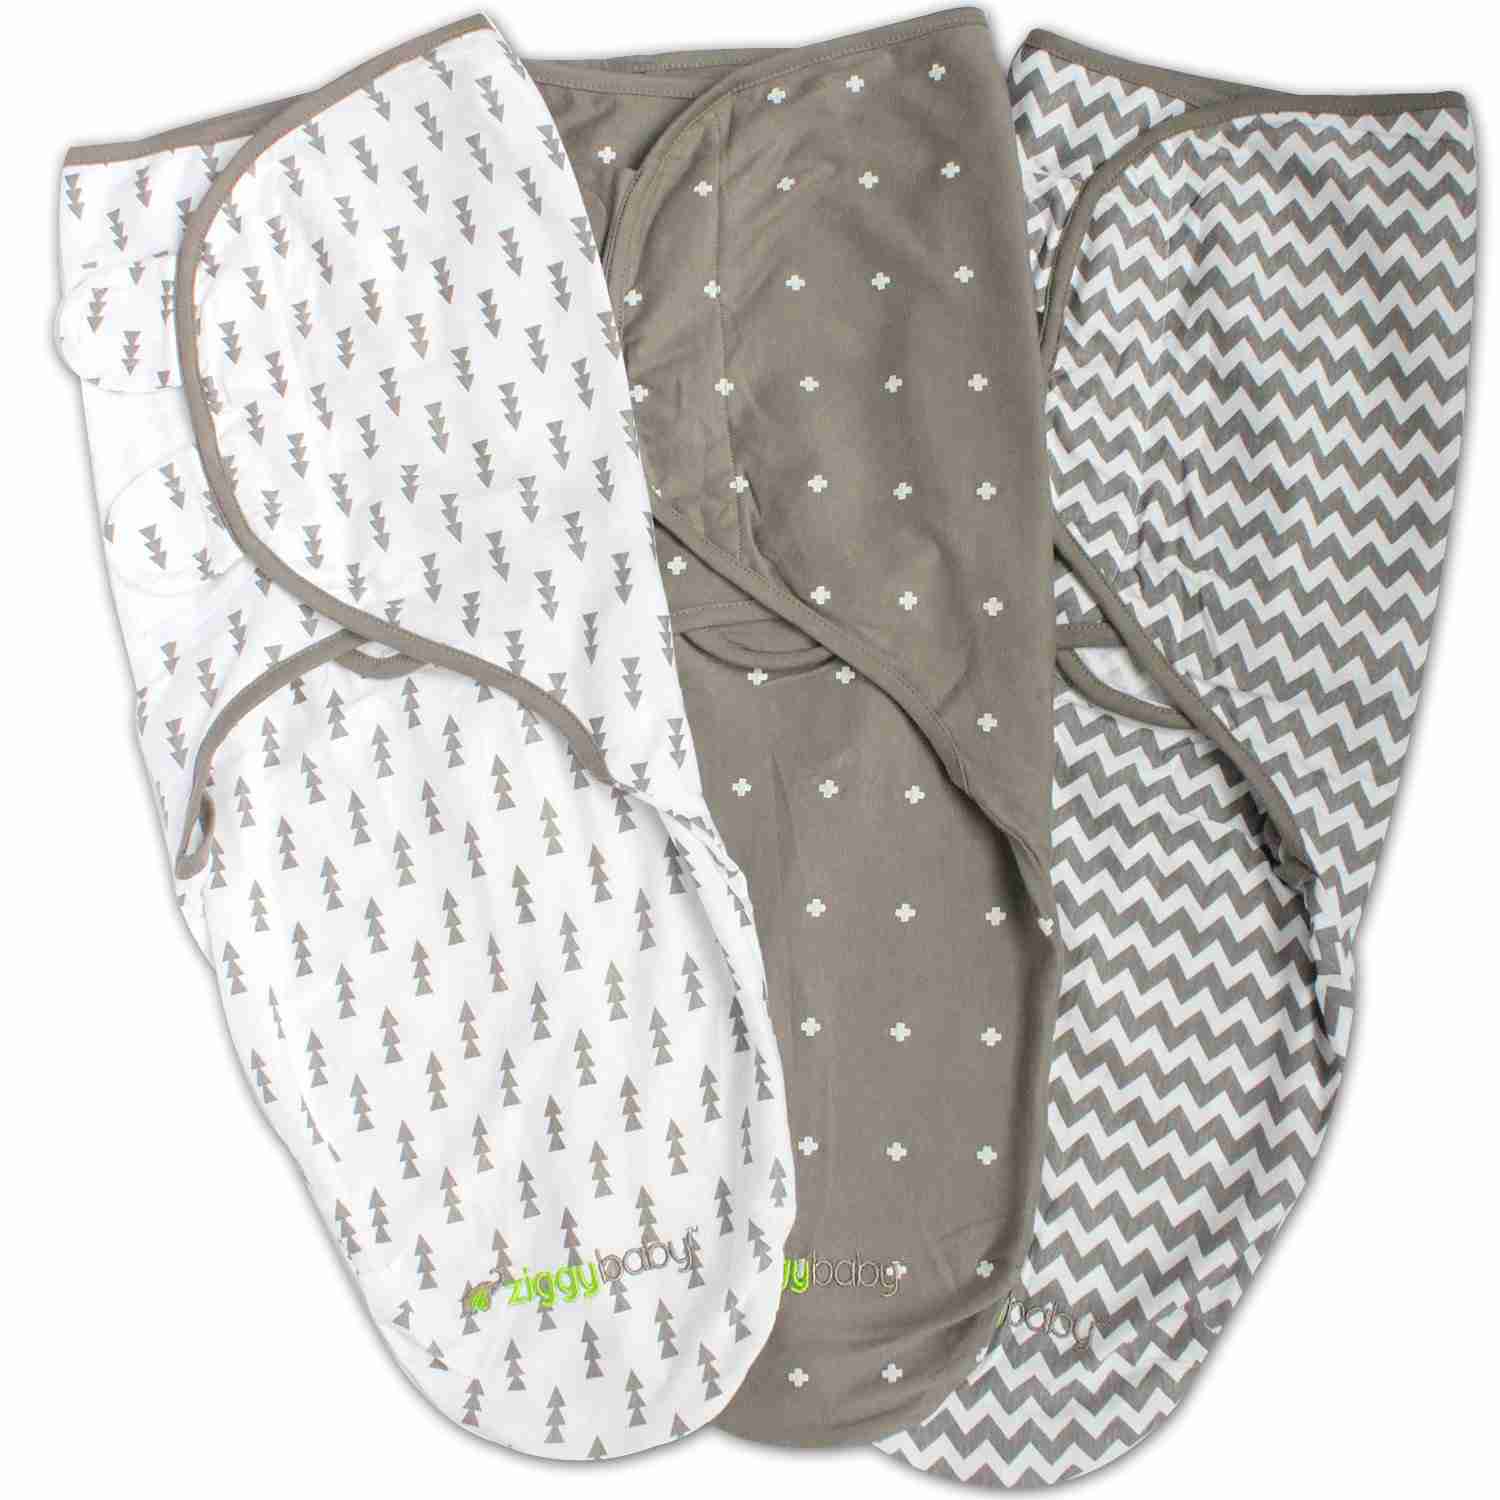 velcro-swaddle with cash back rebate